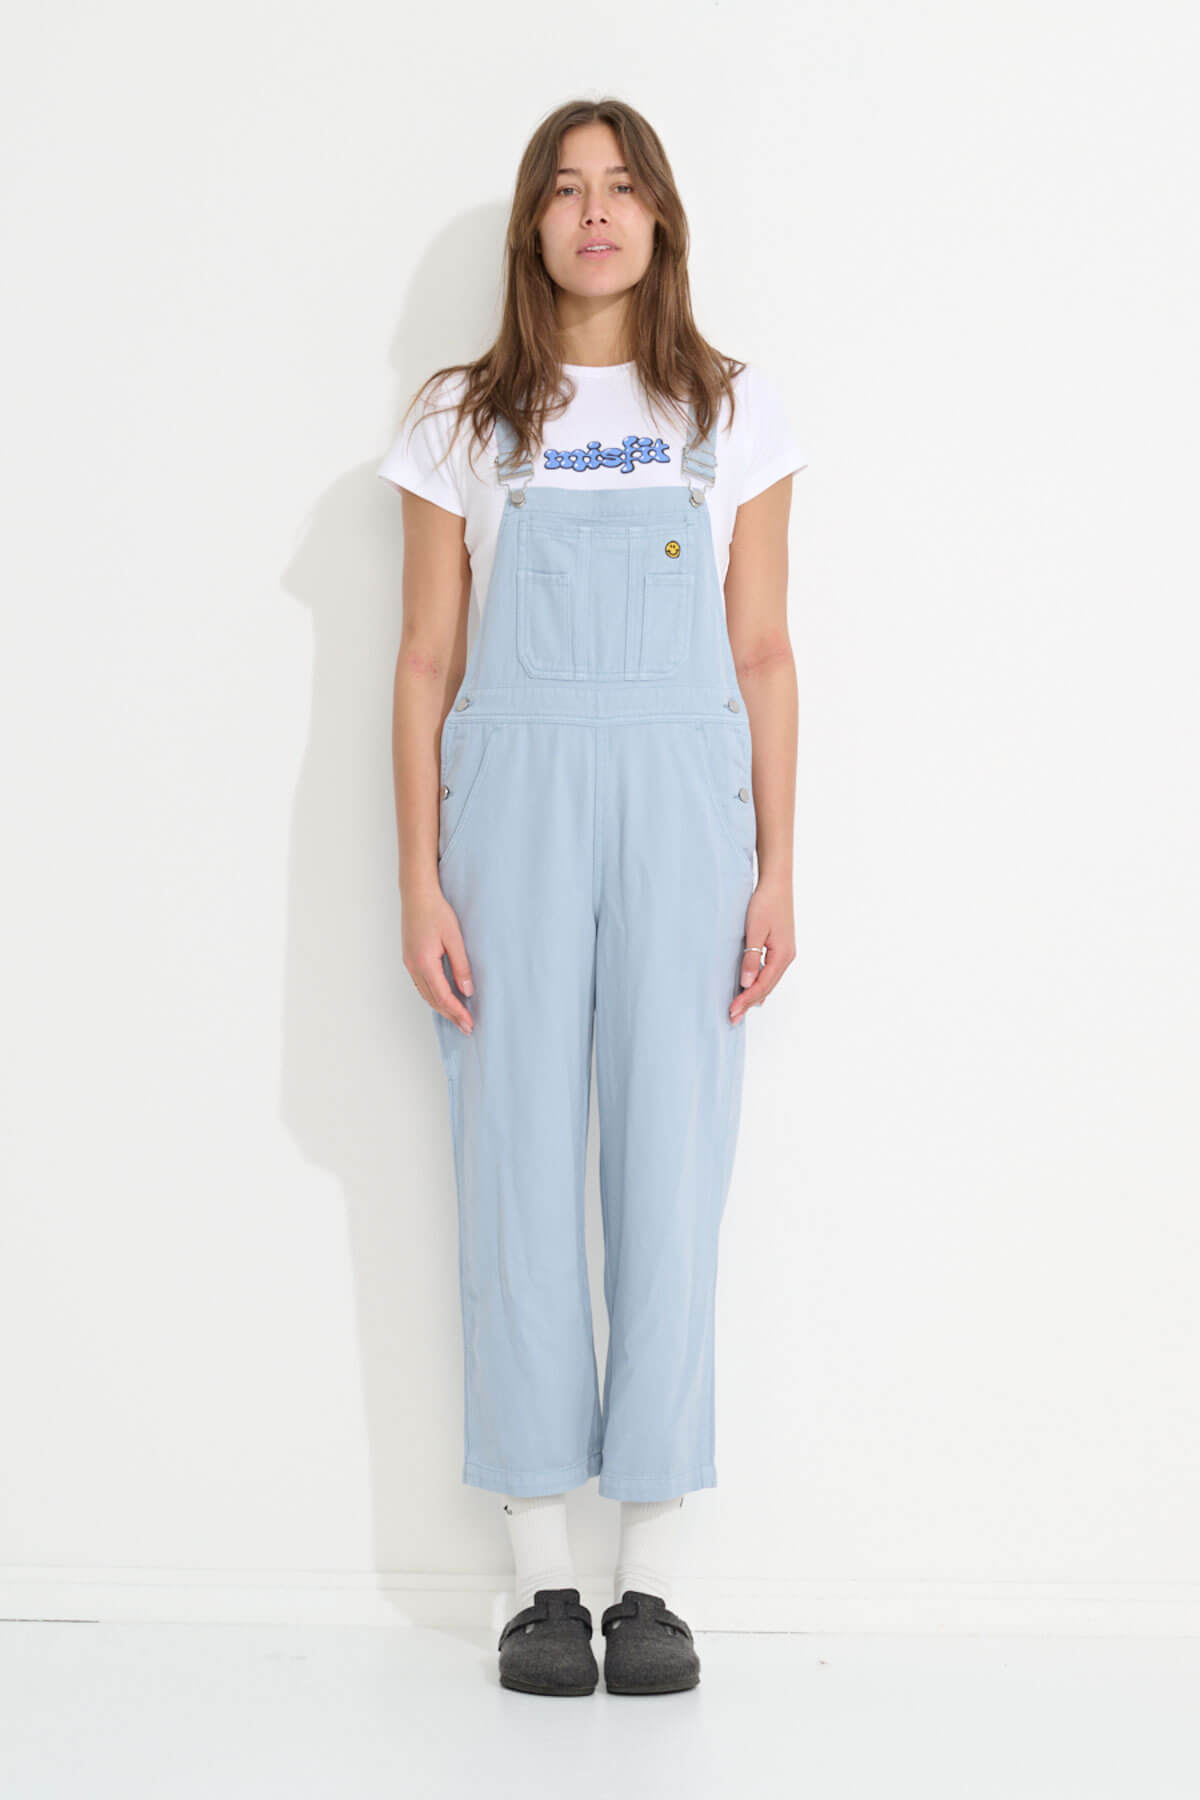 Misfit Shapes - Heavenly People Overalls - Dusty Blue